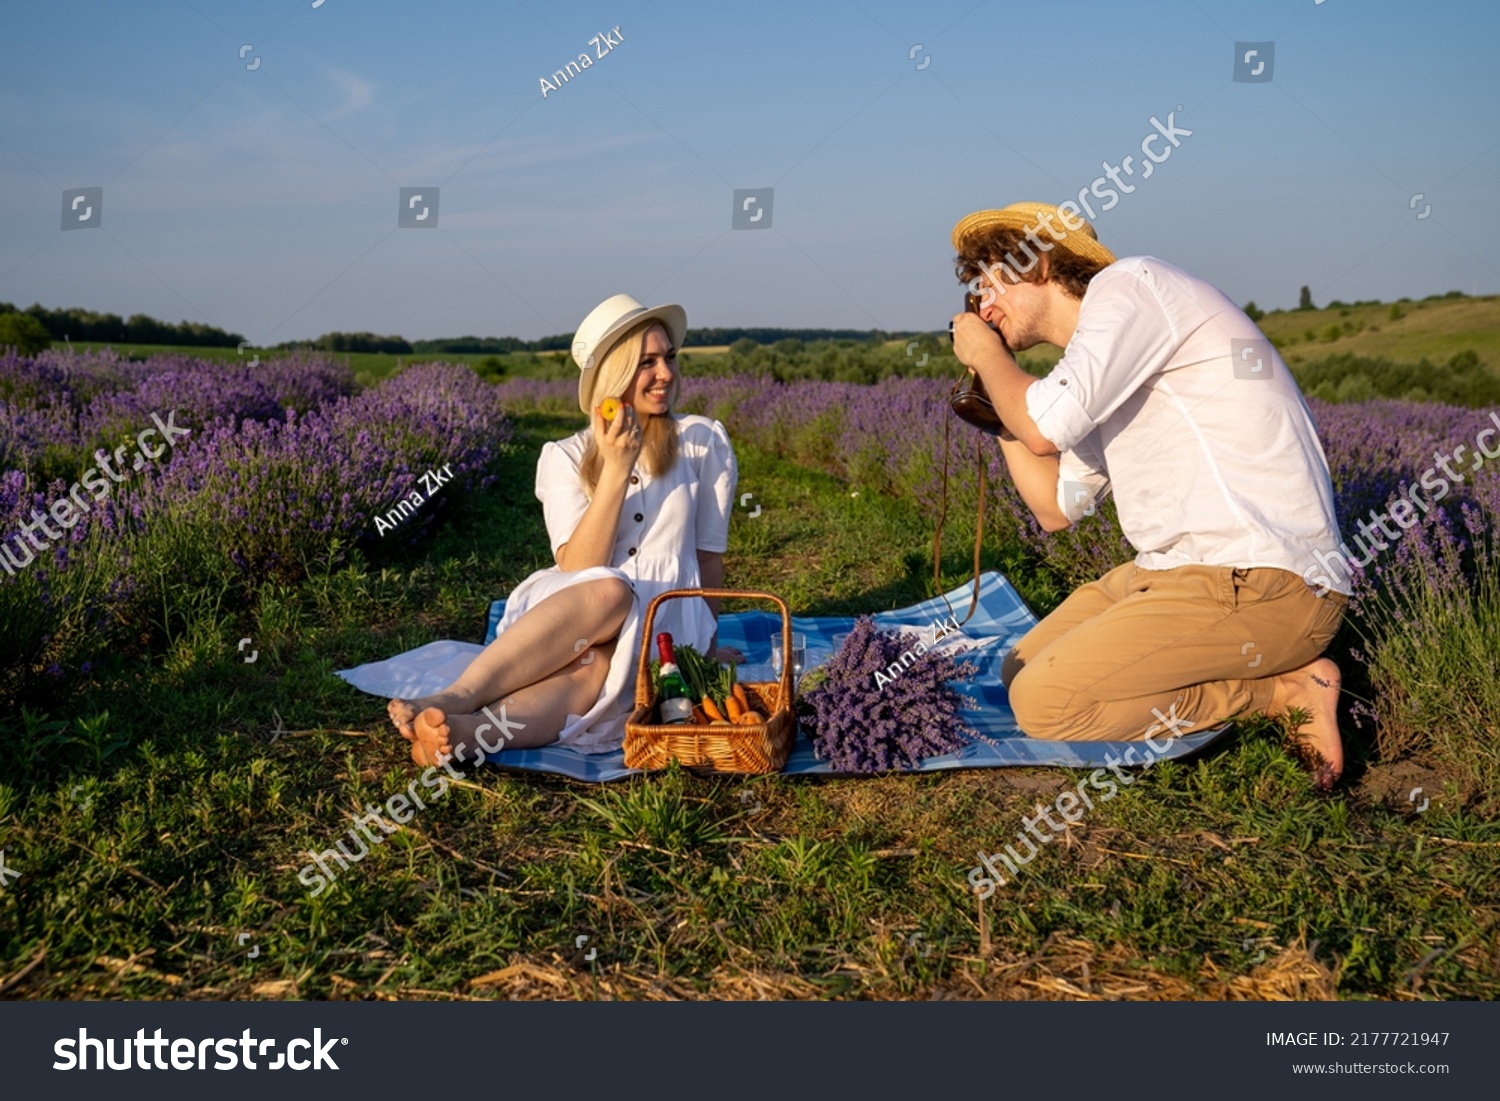 couple in purple lilac outfit have picnic in lavender field, photo session. Romance #2177721947